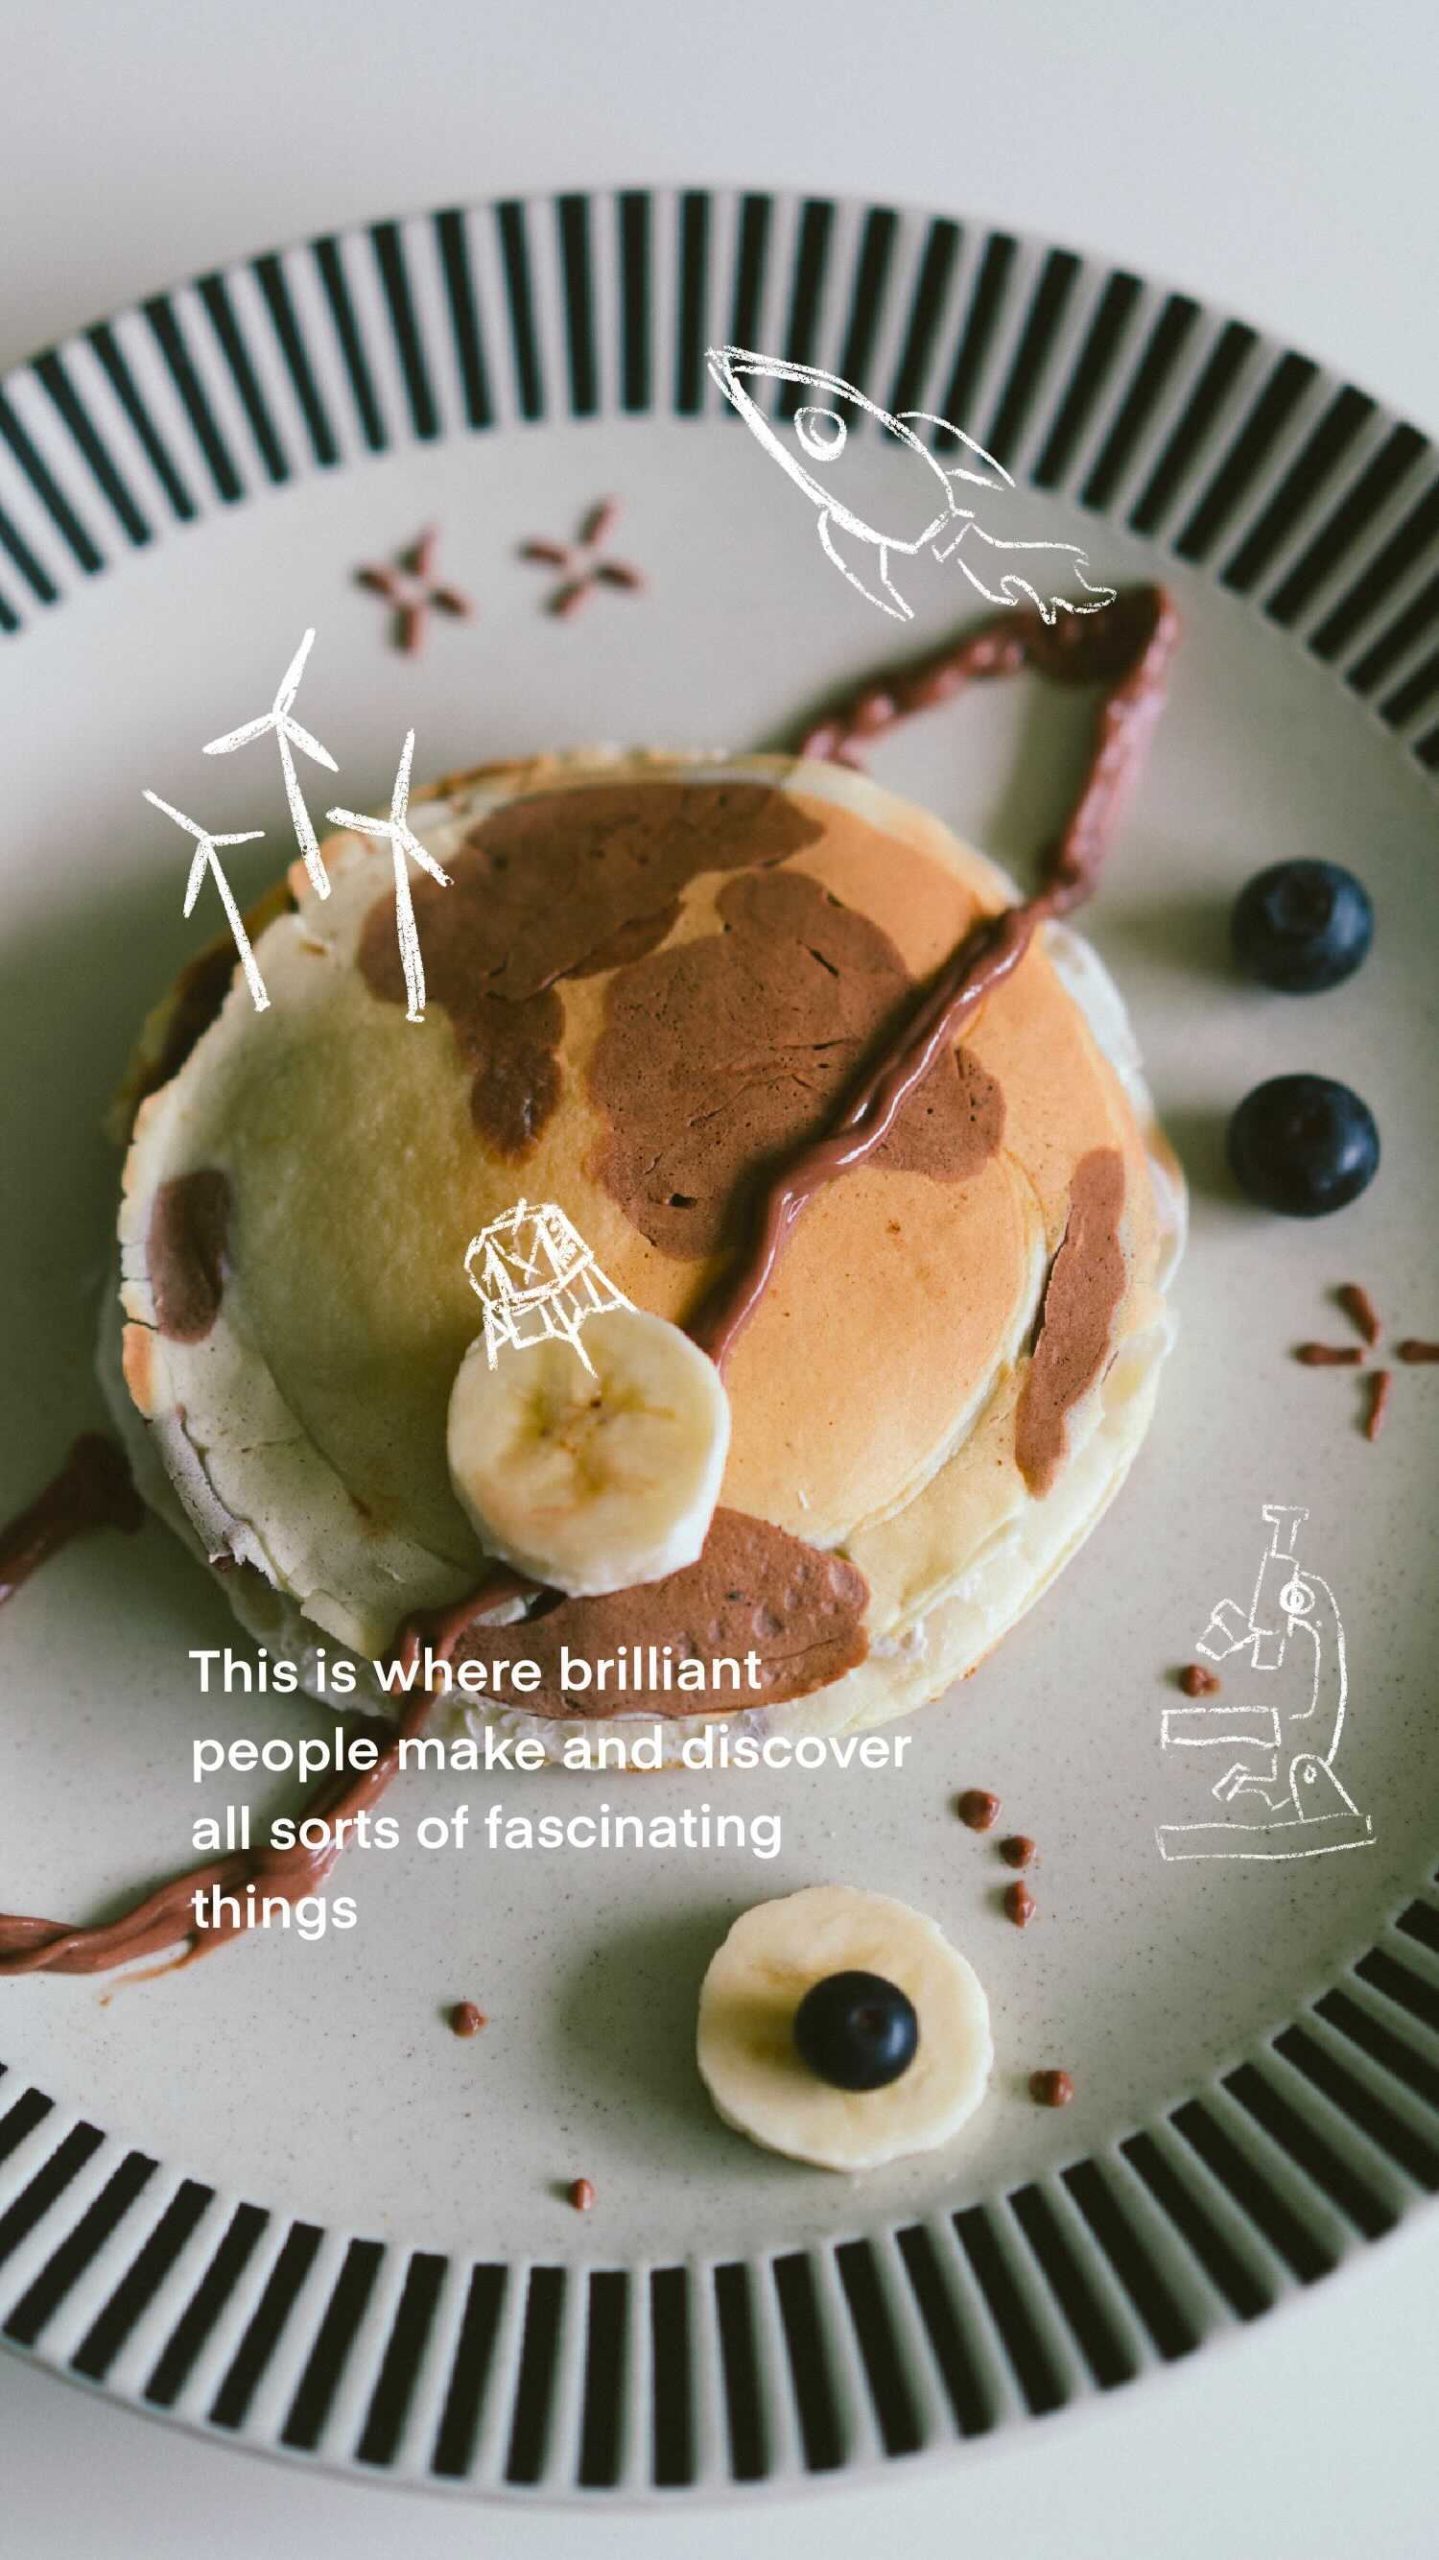 Pancake representing earth with chocolate ring with doodles of microscope and rocket ship quote- This is where brilliant people make and discover all sorts of fascinating things